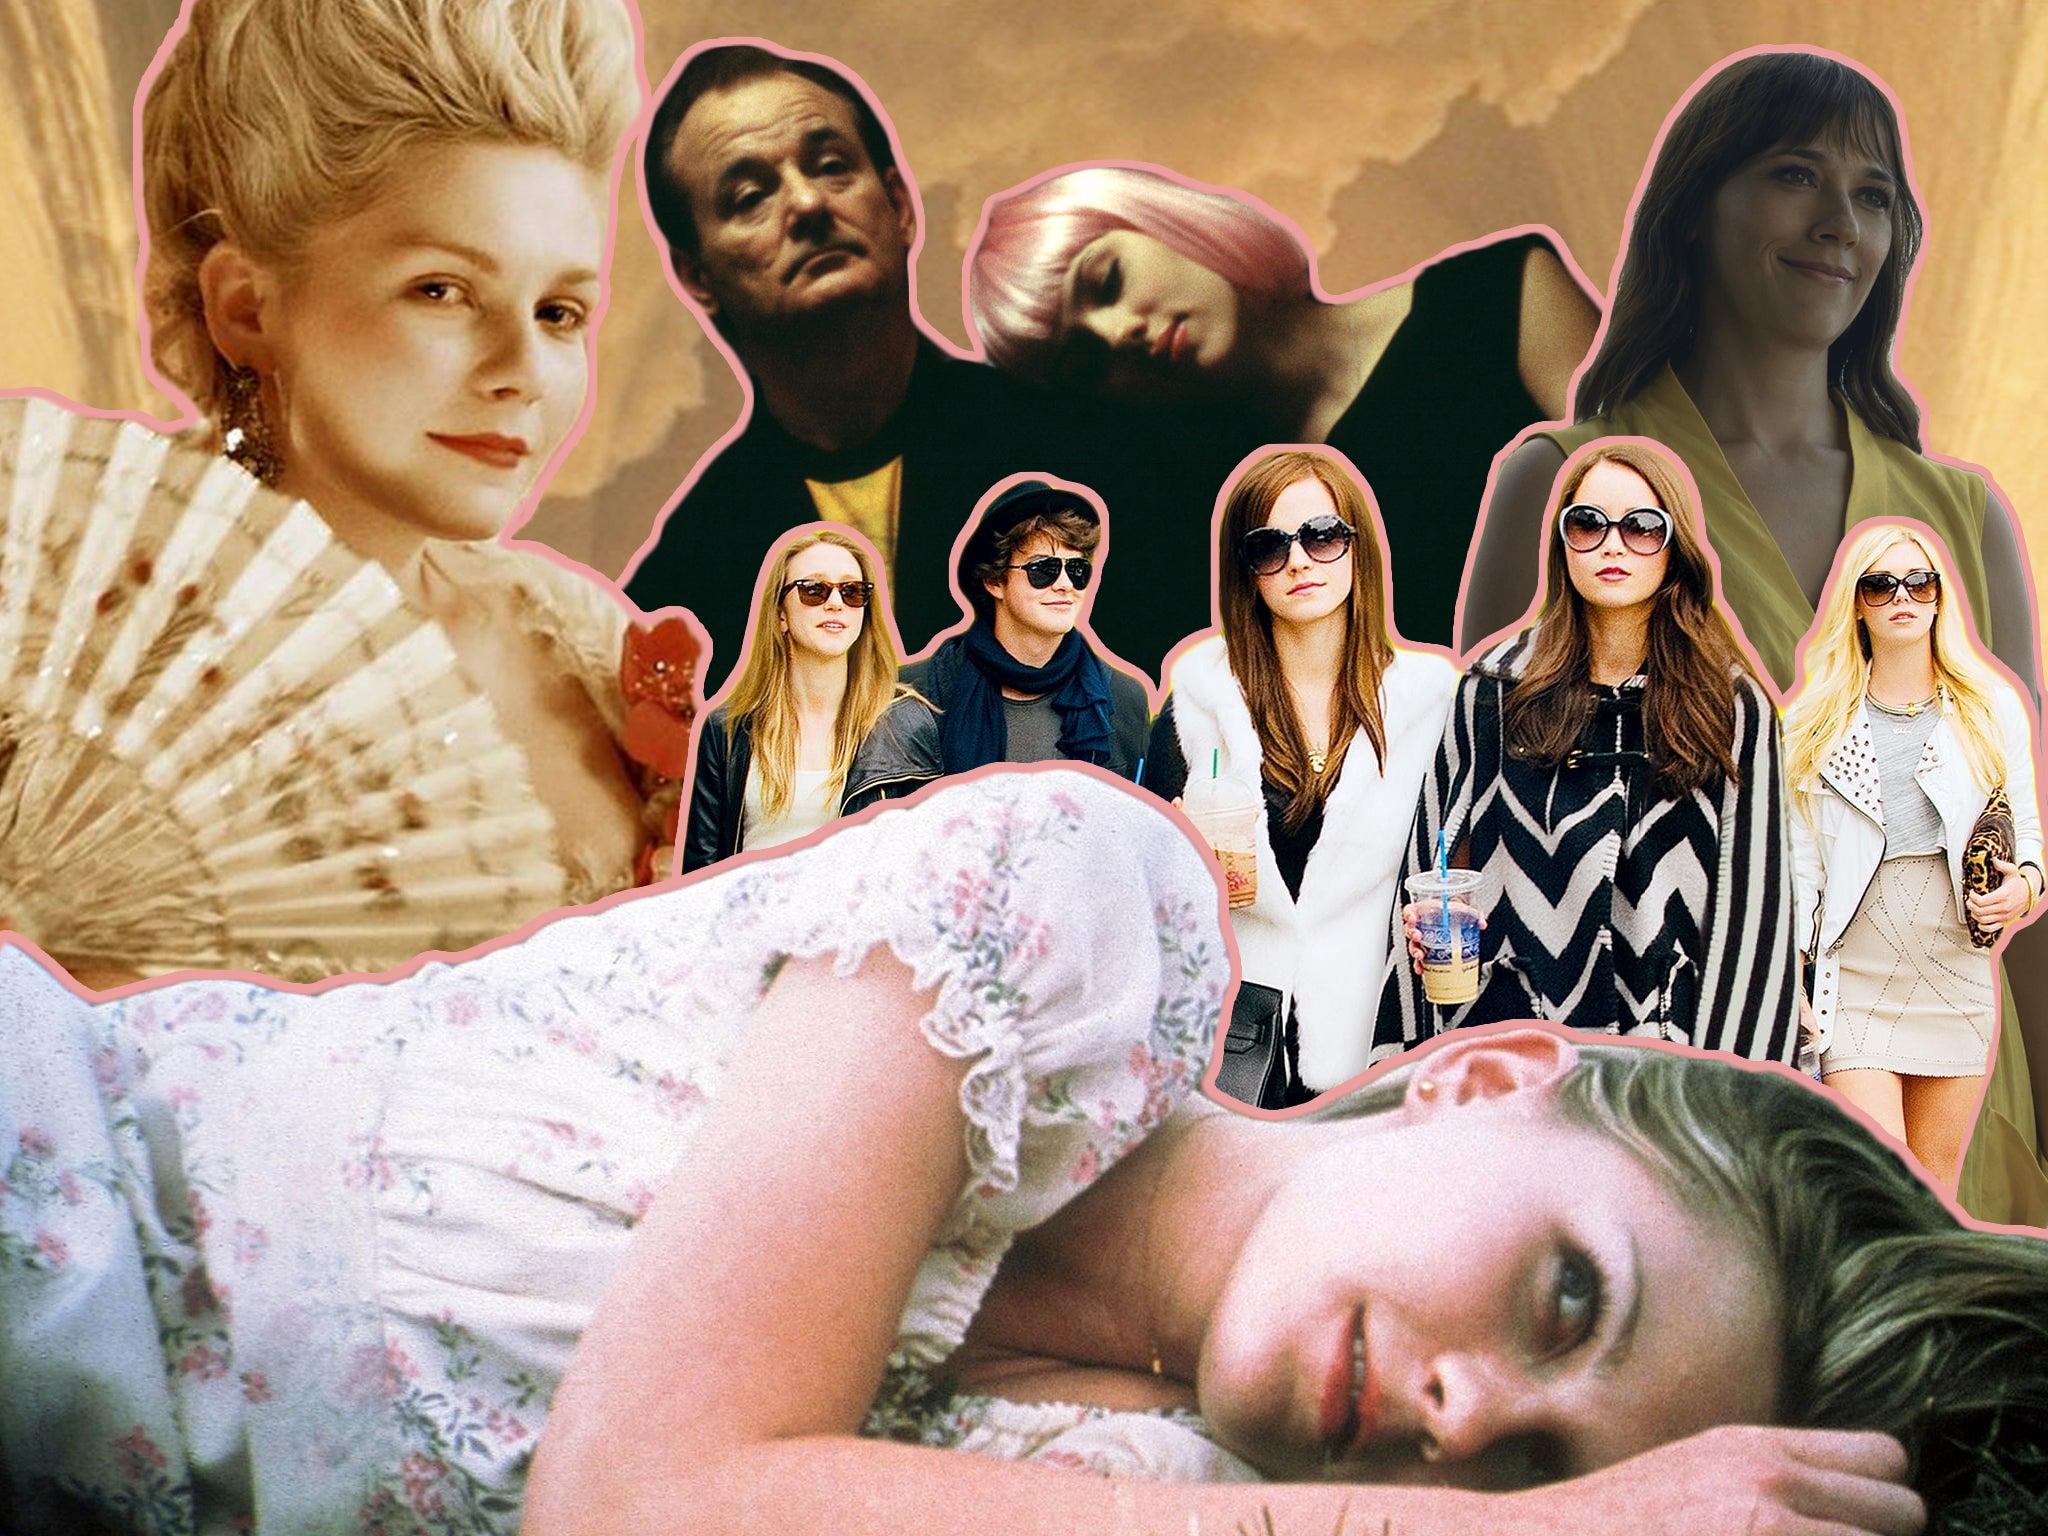 The movies that inspired Sofia Coppola